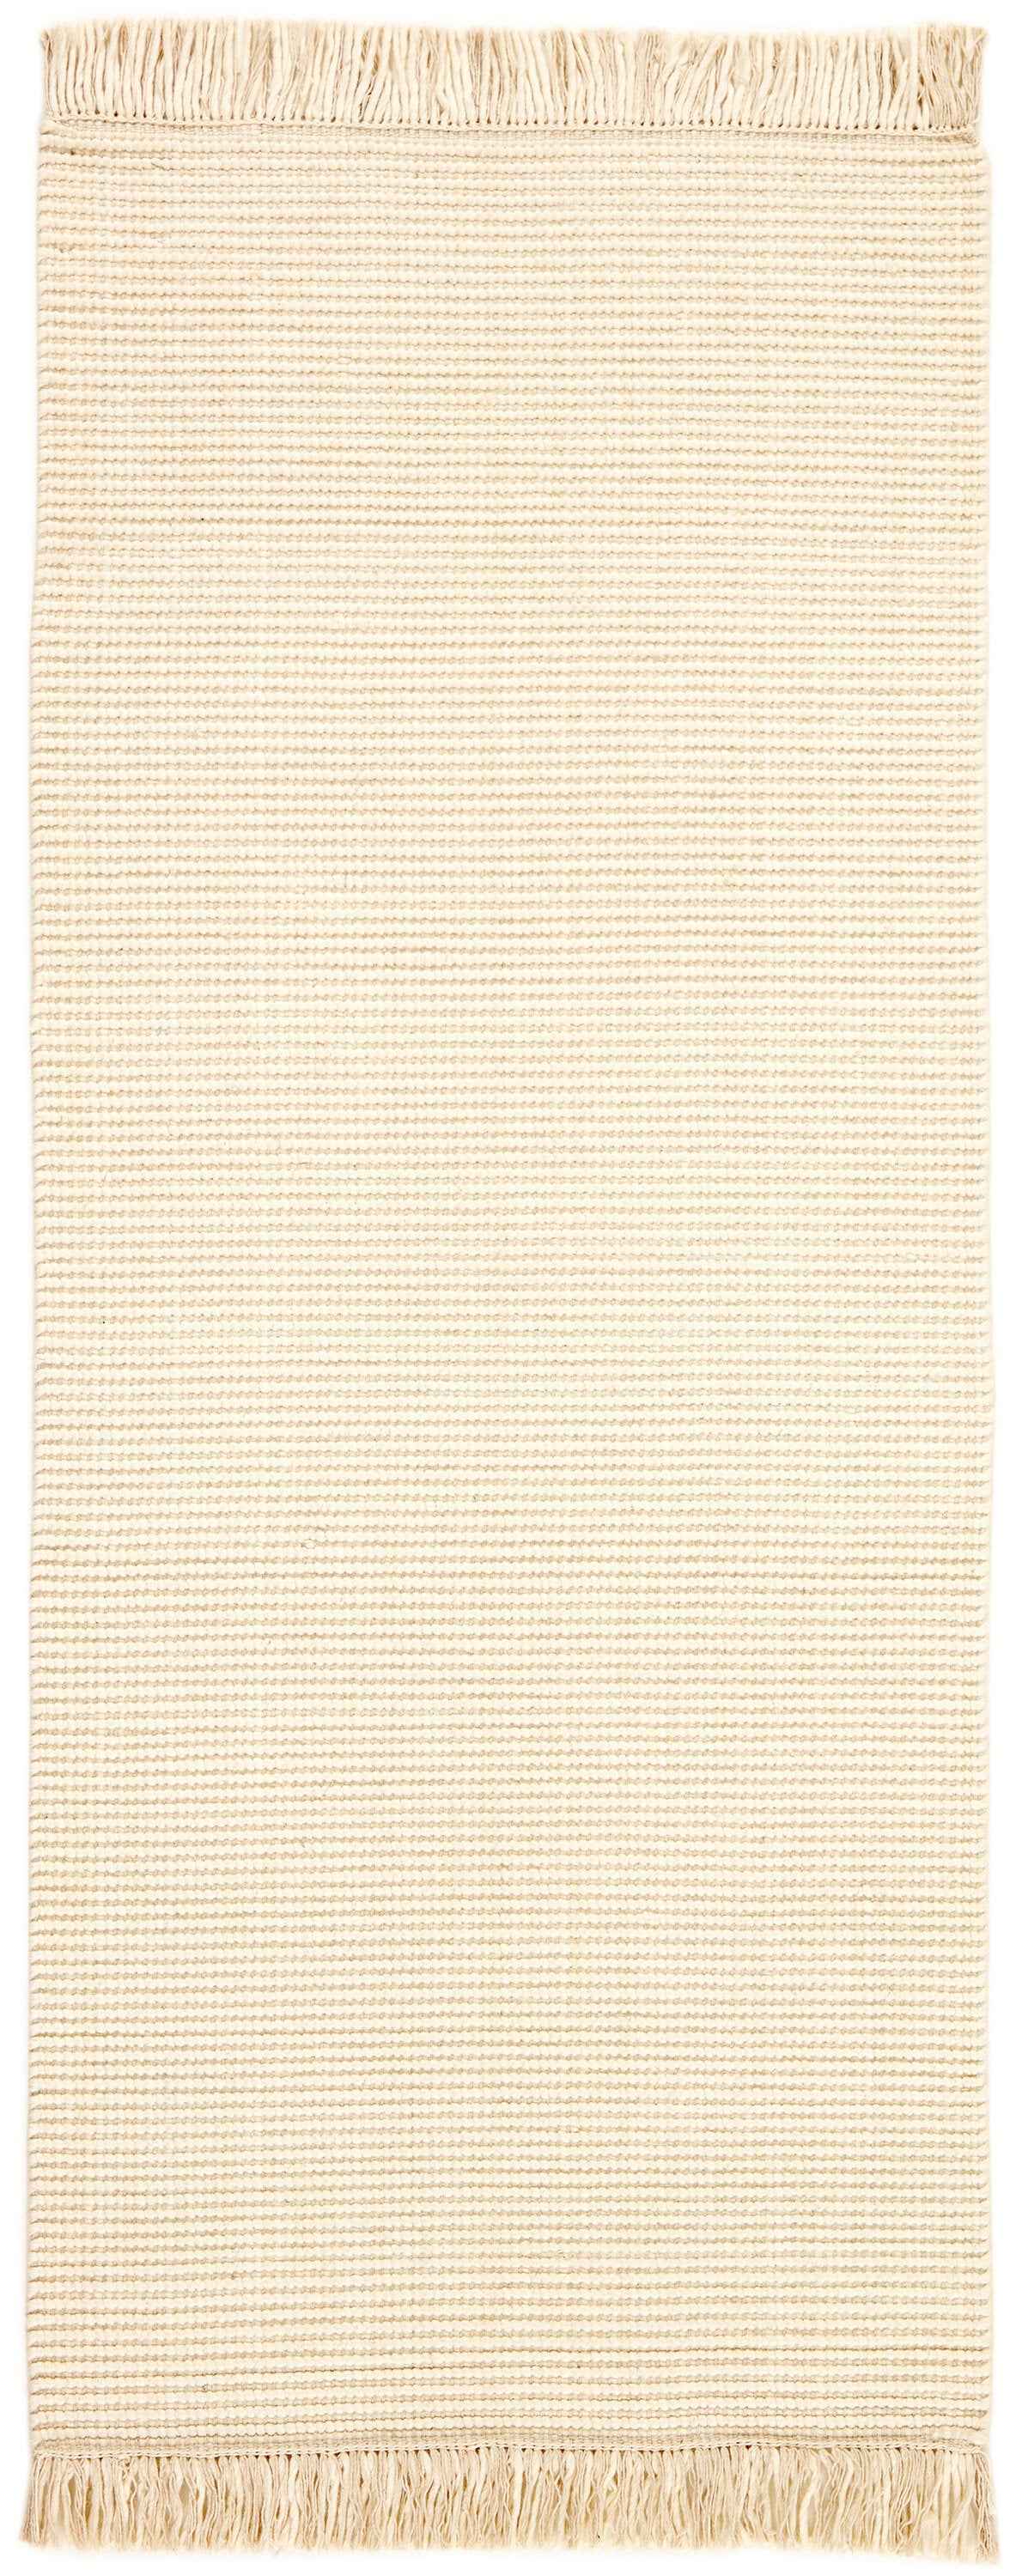 200x200 cm Indian Wool Multicolor Rug-5971A, White - Rugmaster